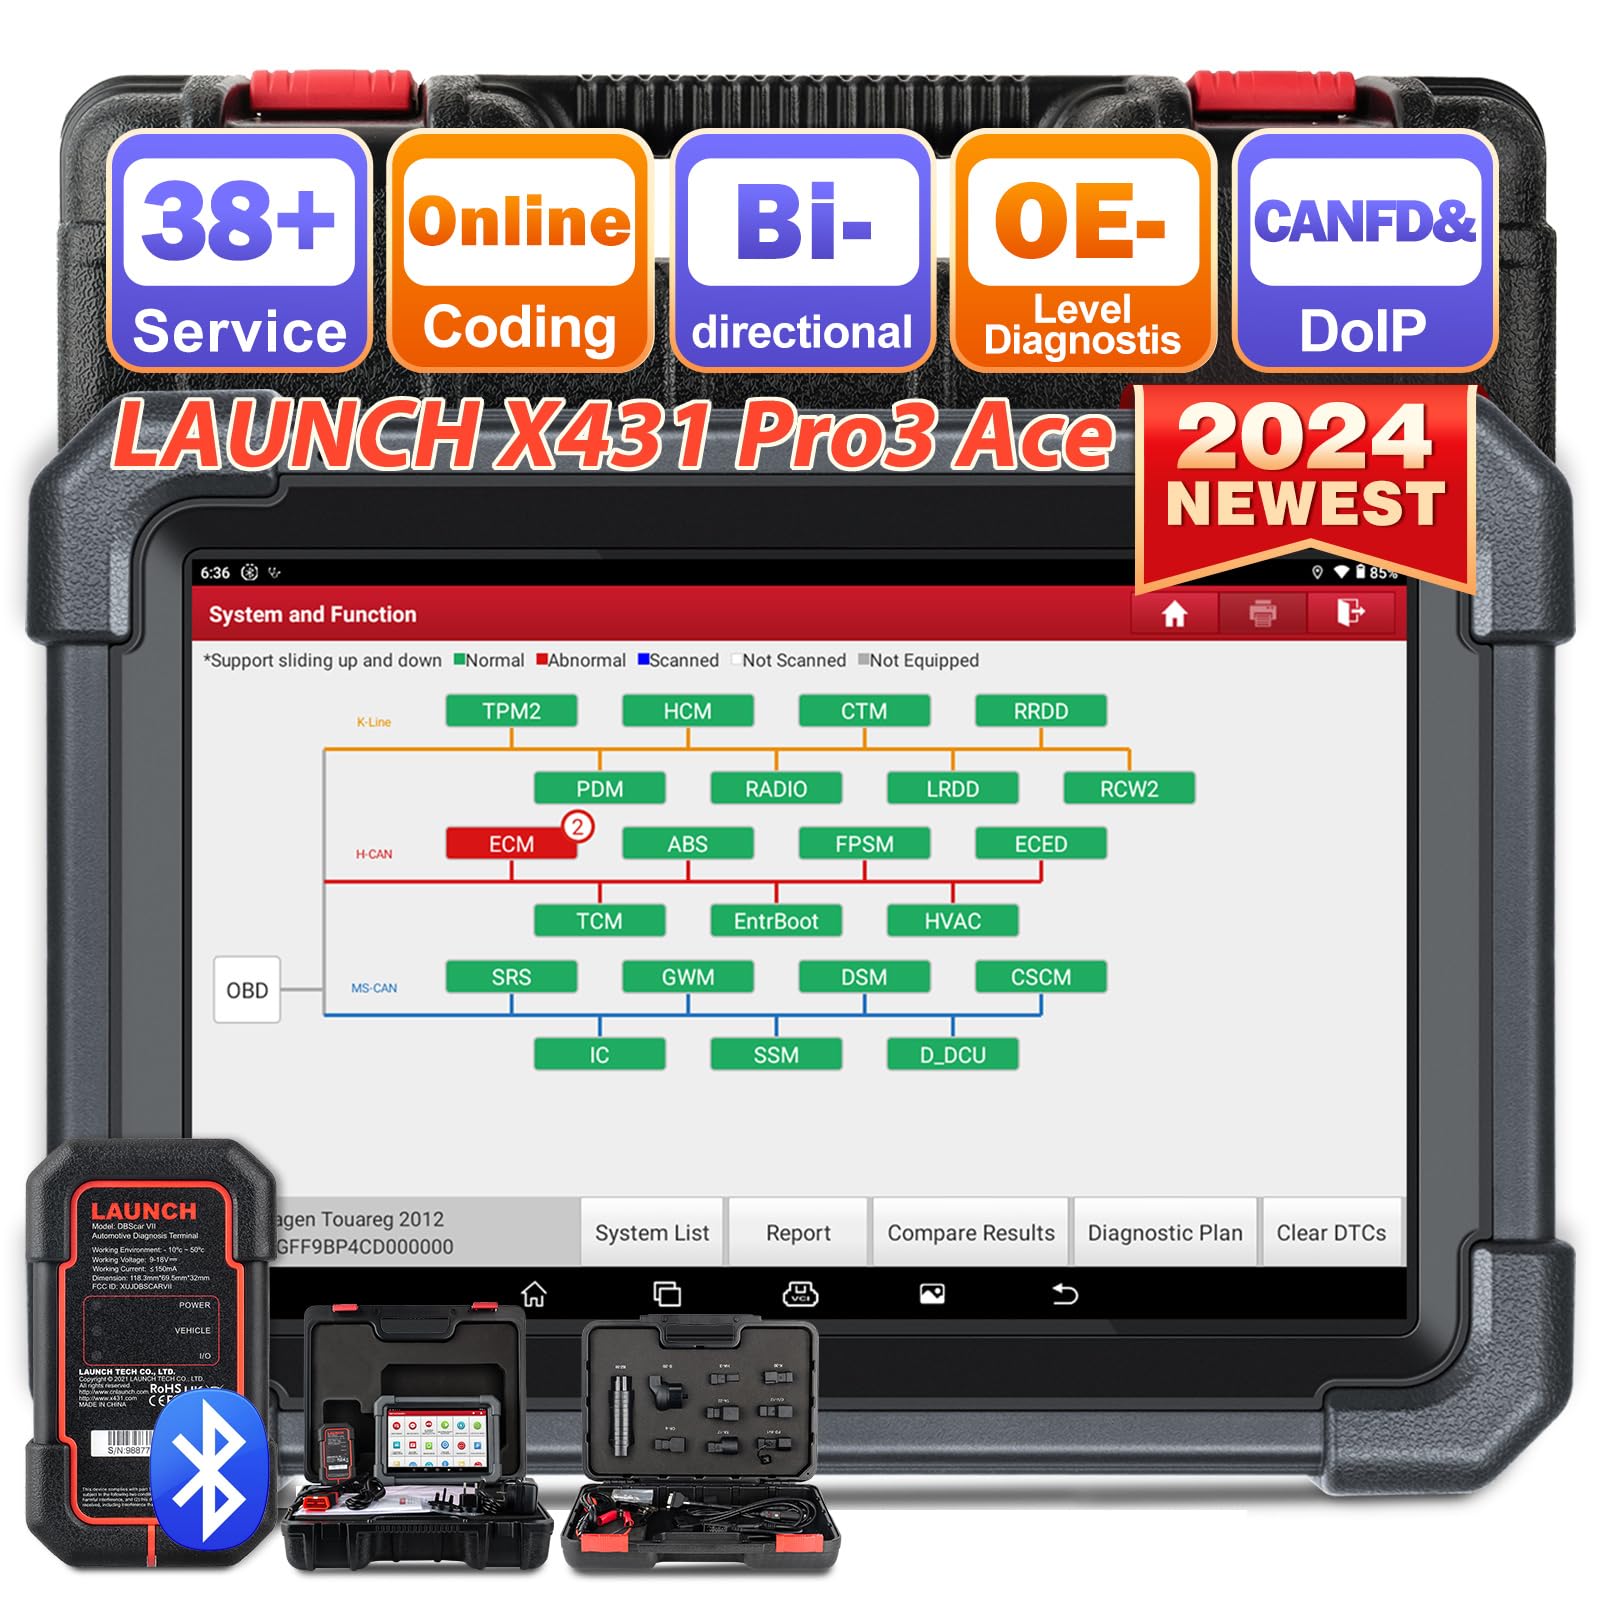 2024 LAUNCH X431 PRO3 ACE LAUNCH X431 obd2 diagnosegerät mit DBScar VII,OEM Topologie Mapping,Online-Codierung,CANFD DoIP,39+ Dienste,AutoAuth FCA SGW,HD LKW-Scan, IMMO,10.1 Zoll diagnosegerät Auto von LAUNCH